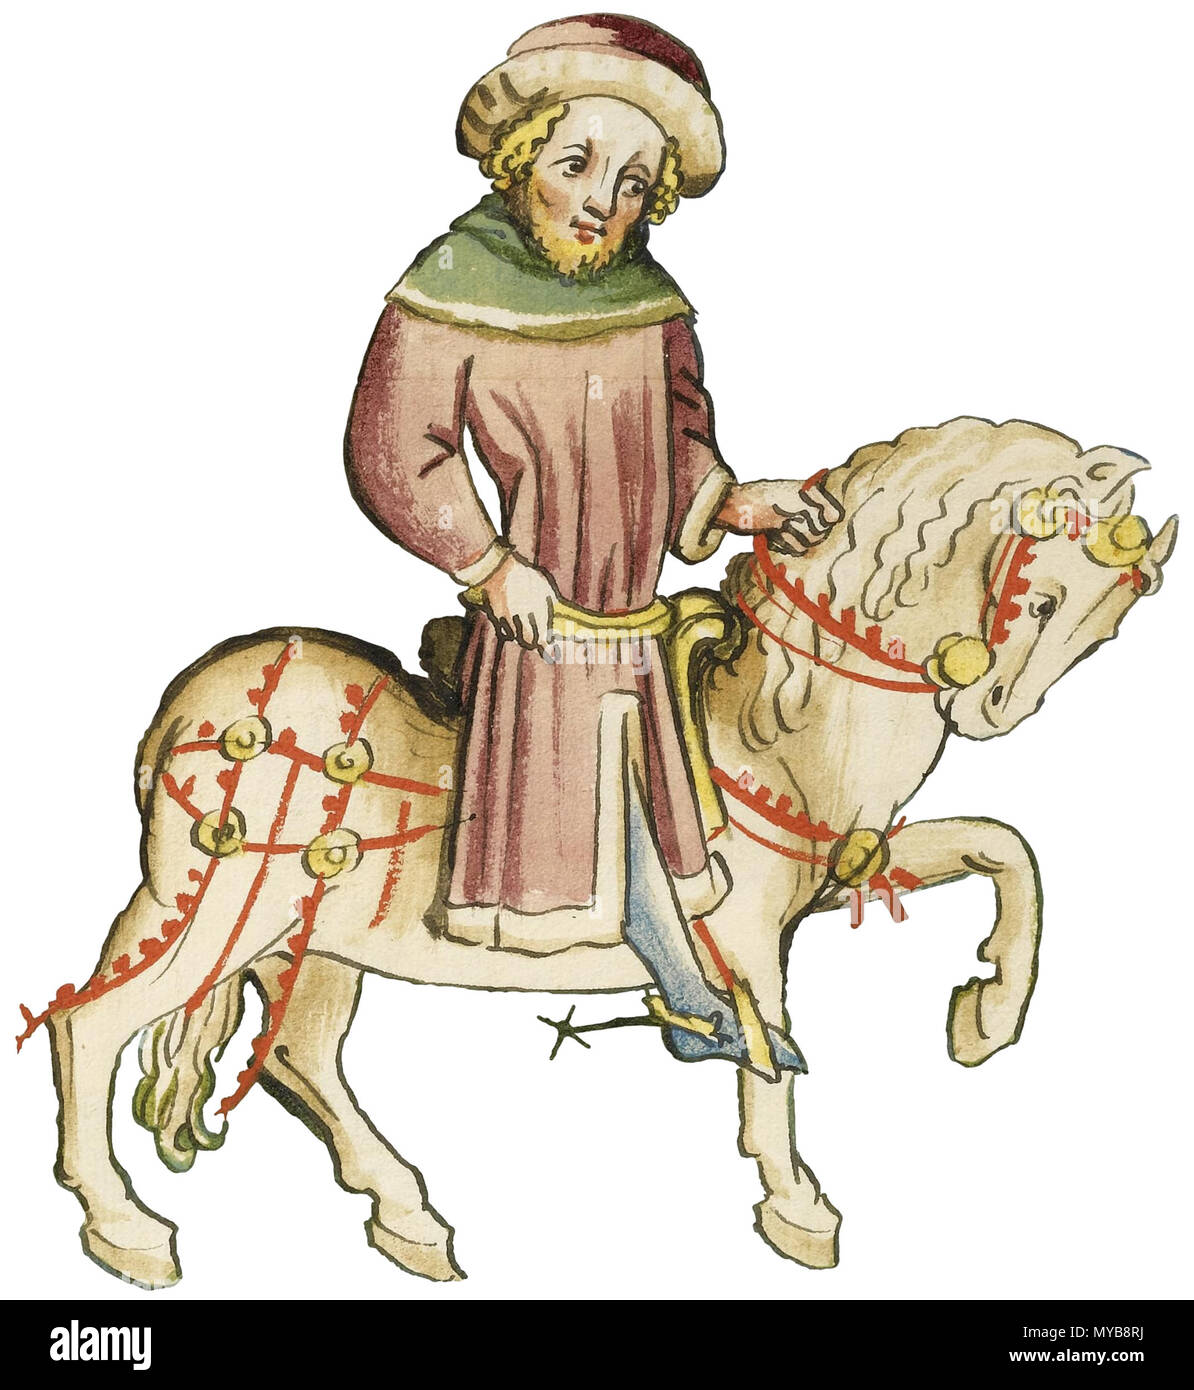 . Eberhard Windeck: Das Buch von Kaiser Sigismund (Handschrift bei Sotheby's 7.7.2009, siehe http://www.handschriftencensus.de/9134) [Not sure: folio 4v, the author Eberhardt Windeck on horseback riding away from his parents' house for the first time; OR folio 6r, the author again on horseback, having ridden down the Rhine, arriving at the entrance to the city of Cologne, surmounted by his arms] . circa 1440-50. Illustrator aus der Werkstatt von Diebold Lauber 89 Buch-kaiser-sigismund-L09740-26-lr-10 Stock Photo